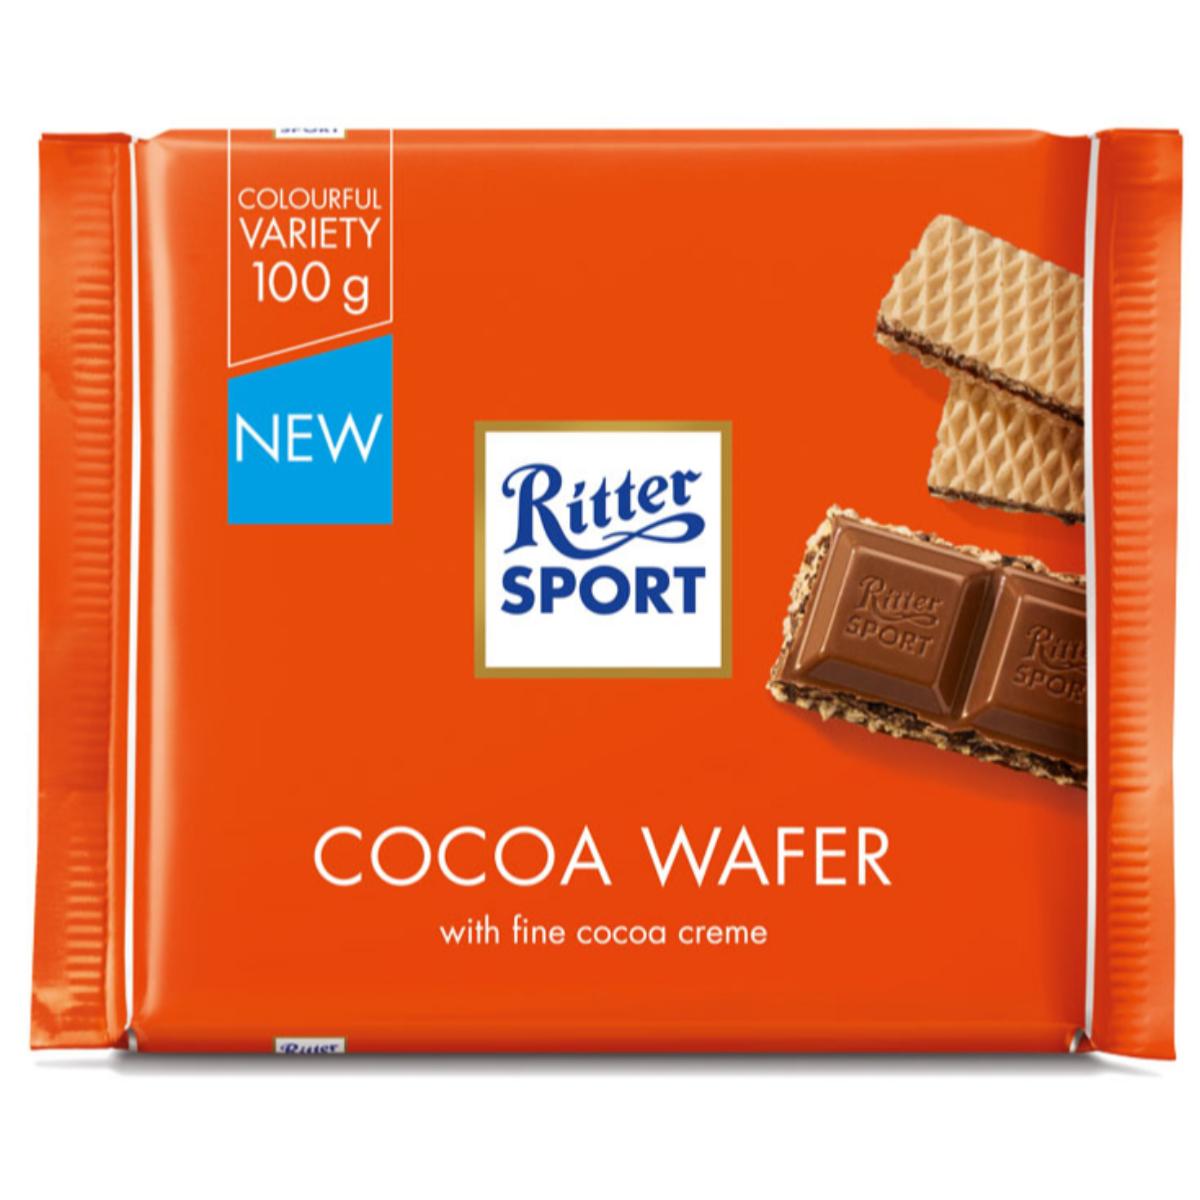 Ritter Sport Cocoa Wafer